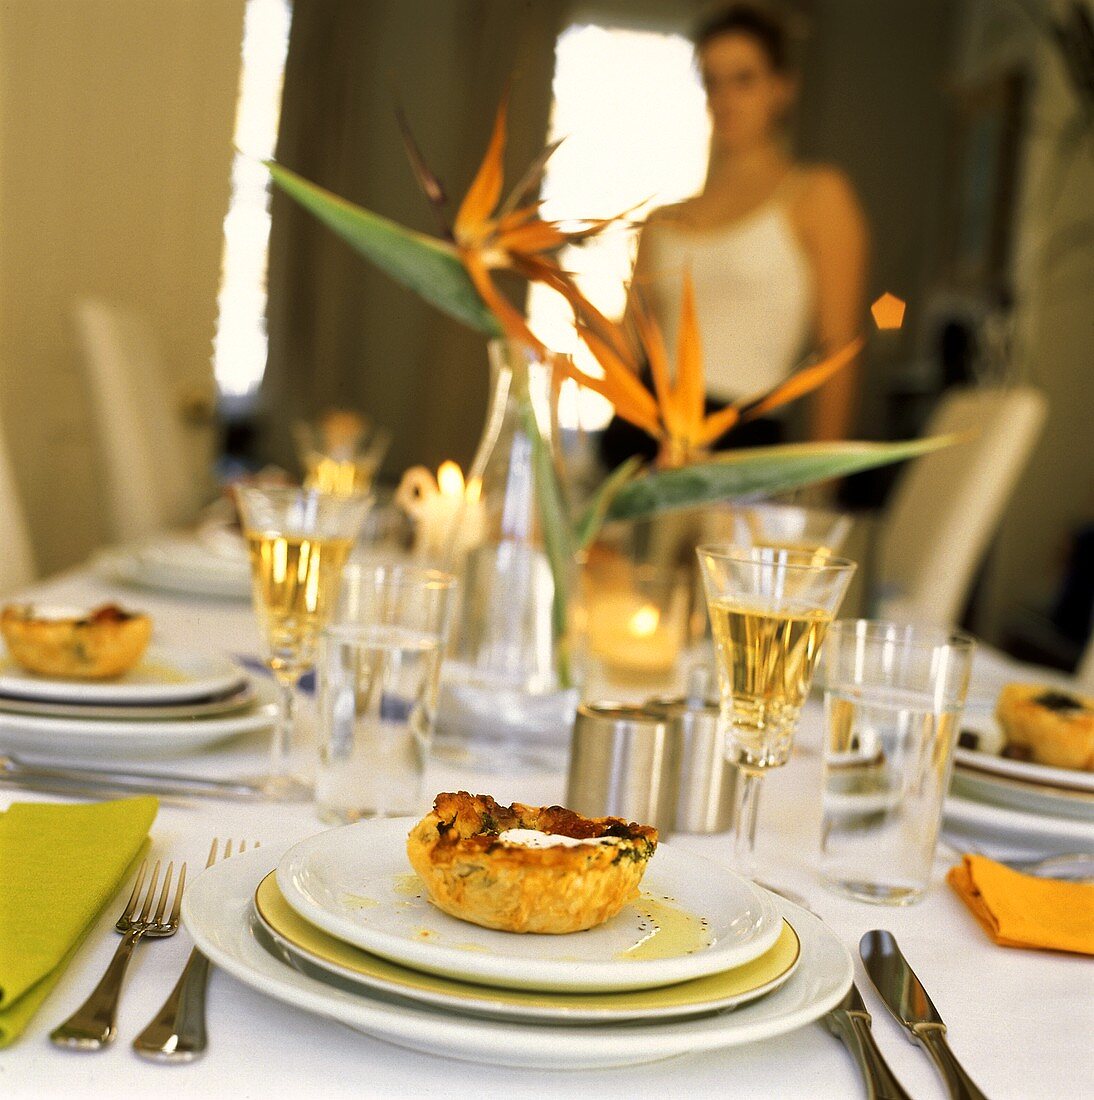 Tablesetting with Appetizers